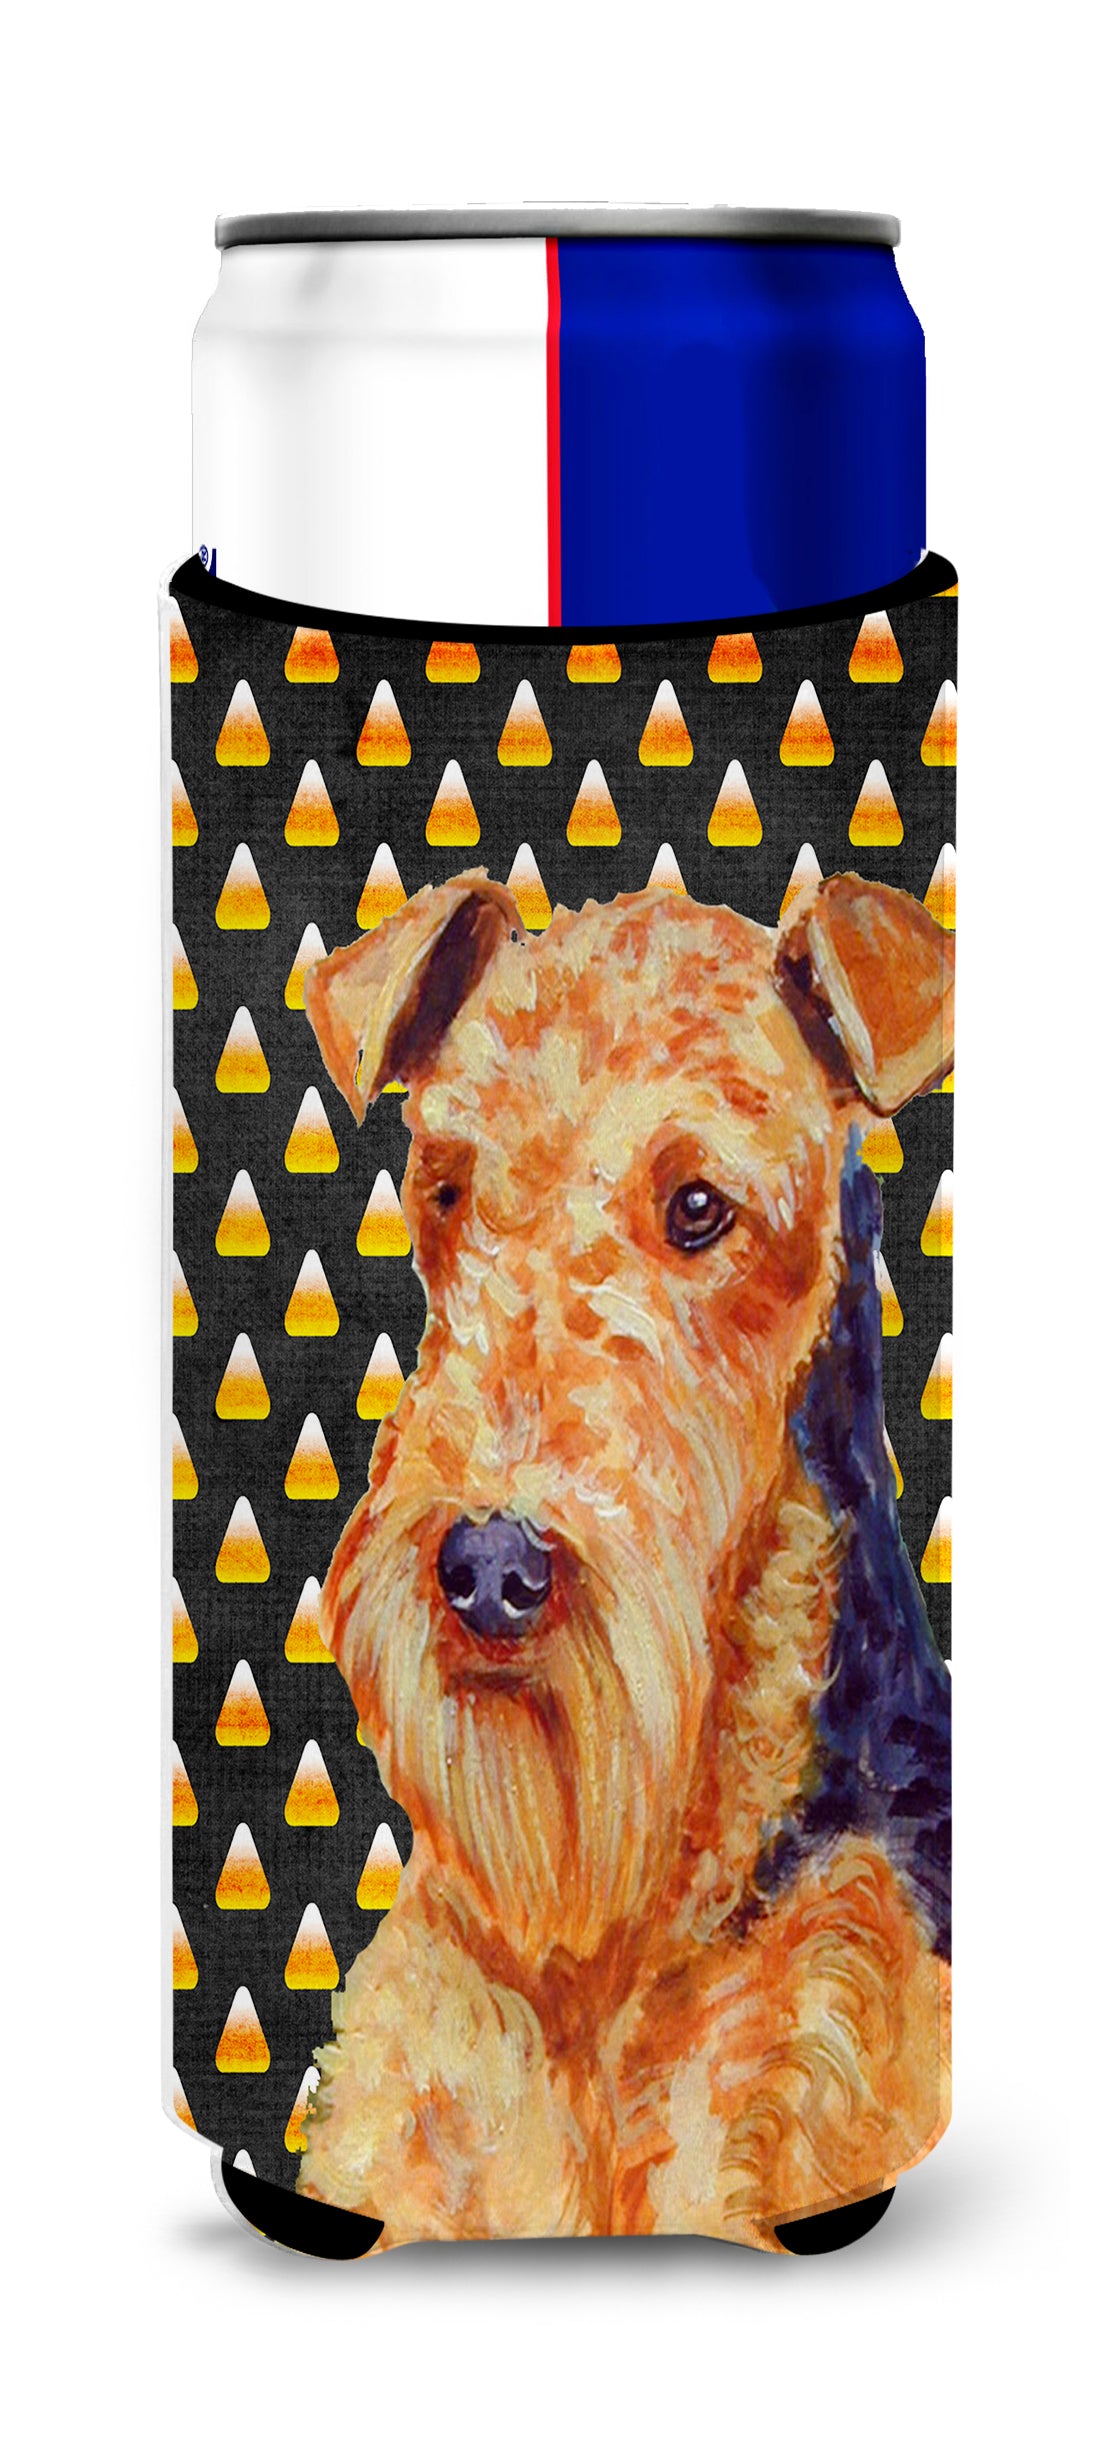 Airedale Candy Corn Halloween Portrait Ultra Beverage Insulators for slim cans LH9077MUK.